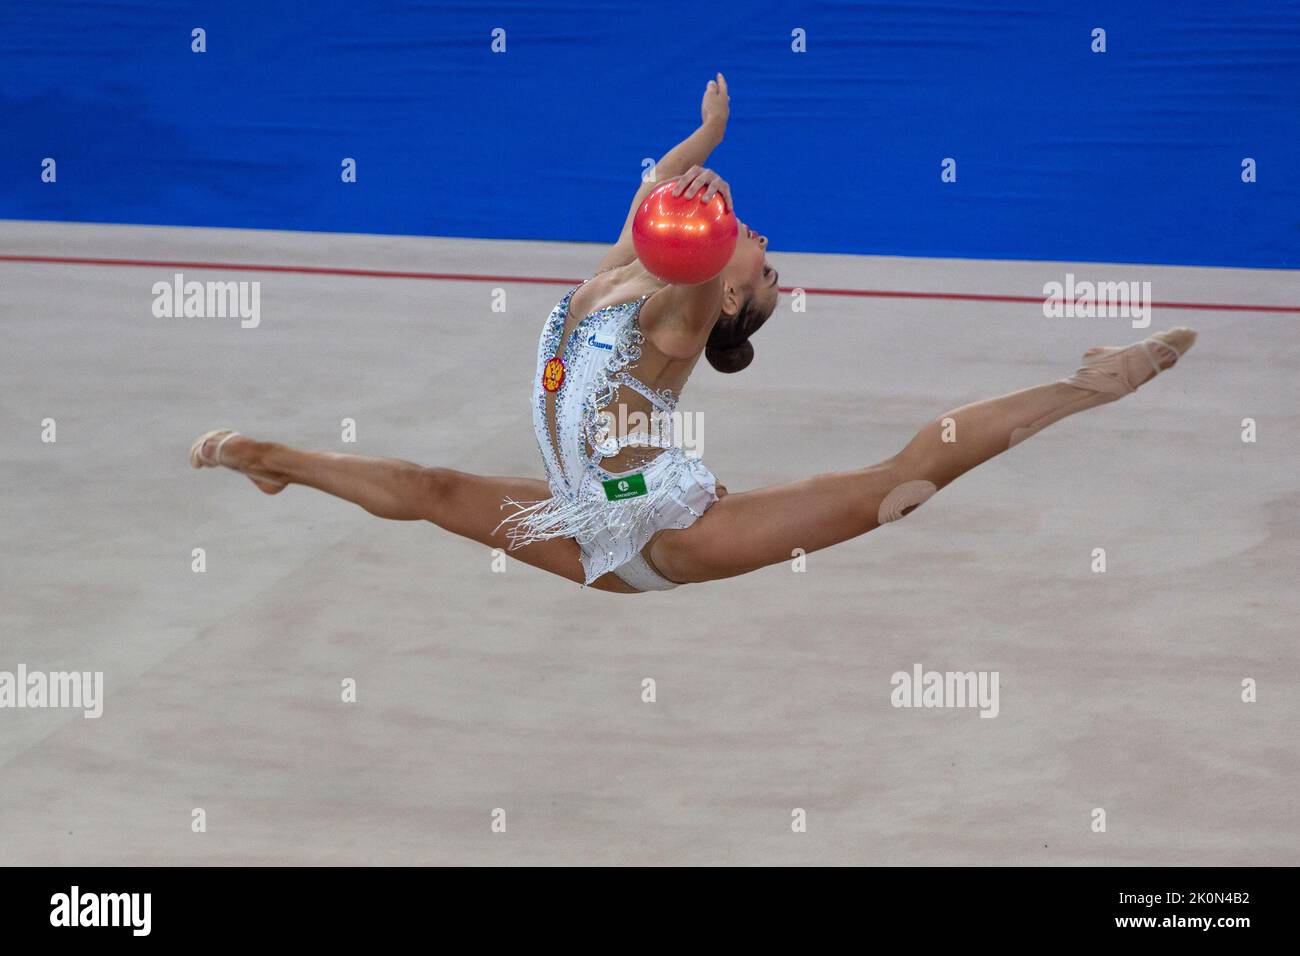 Moscow, Russia. 12th of September, 2022. Sofya Agafonova performs her ball routine in a qualification at the 2022 All-Russian Summer Spartakiad in Rhythmic Gymnastics at Irina Viner-Usmanova Gymnastics Palace in Luzhniki in Moscow, Russia. Nikolay Vinokurov/Alamy Live News Stock Photo